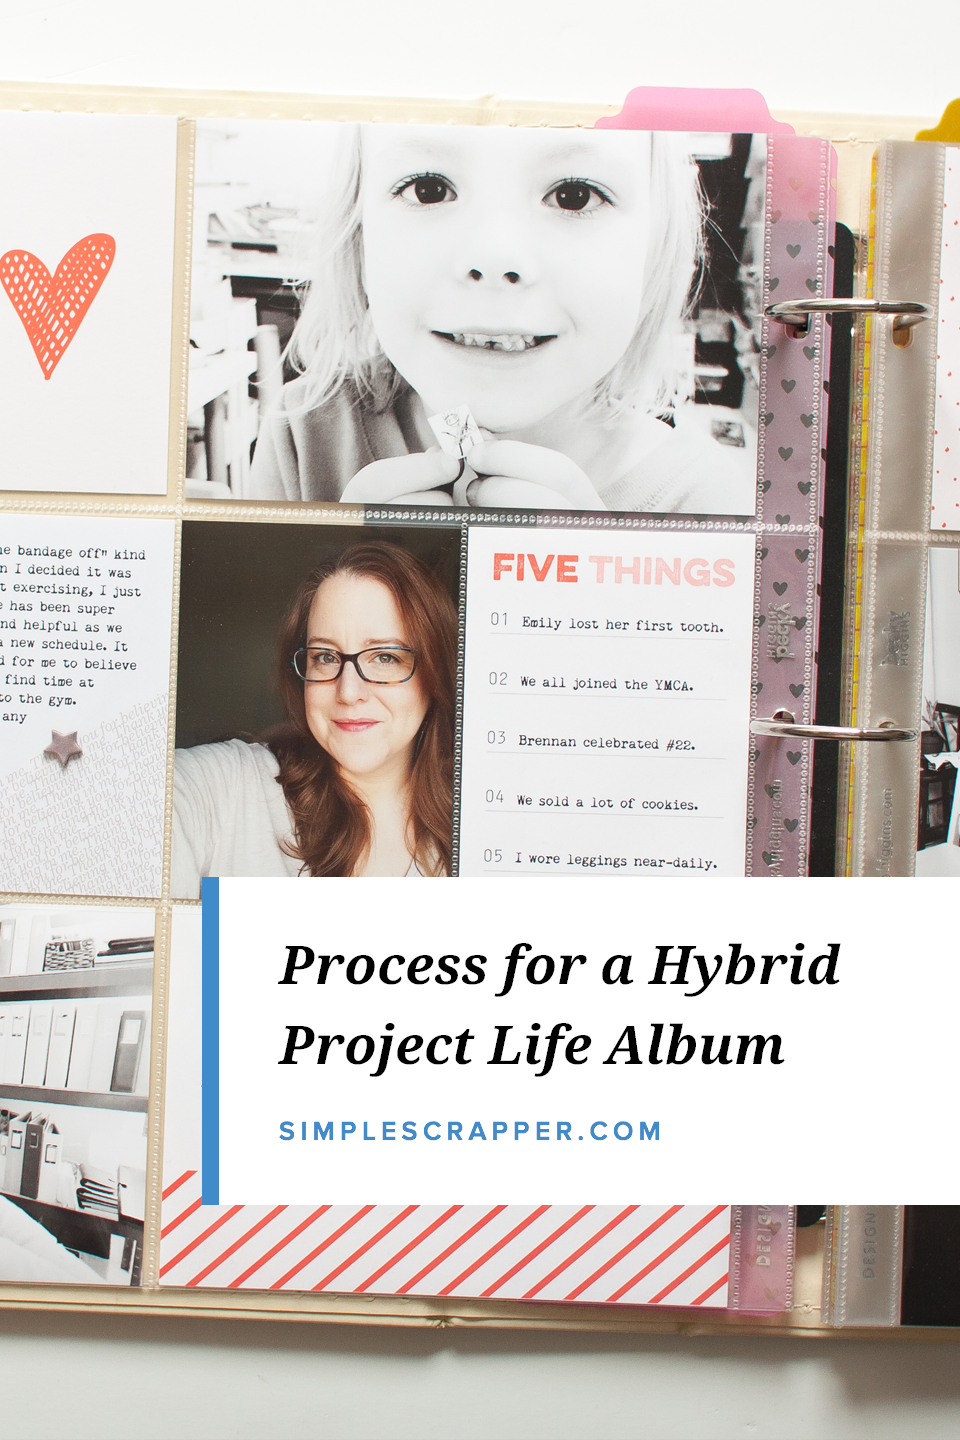 Download free templates for creating a hybrid Project Life spread using Lightroom and Photoshop.